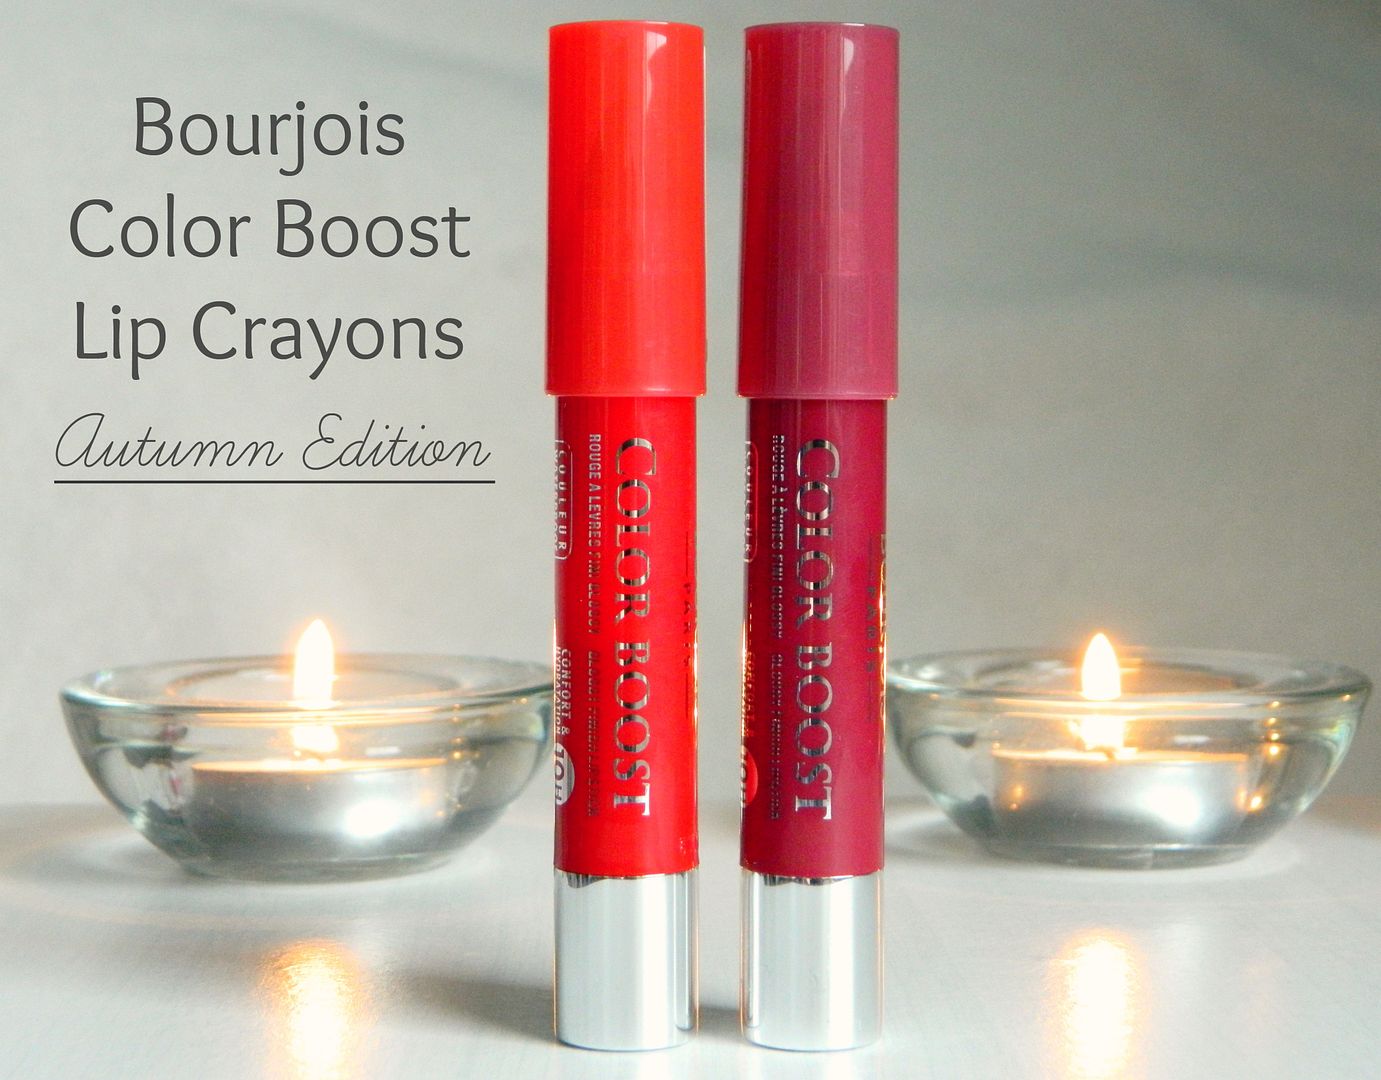 Bourjois Color Boost Lip Crayons Autumn Edition Red Island Plum Russian Review Belle-amie UK Beauty Fashion Lifestyle Blog